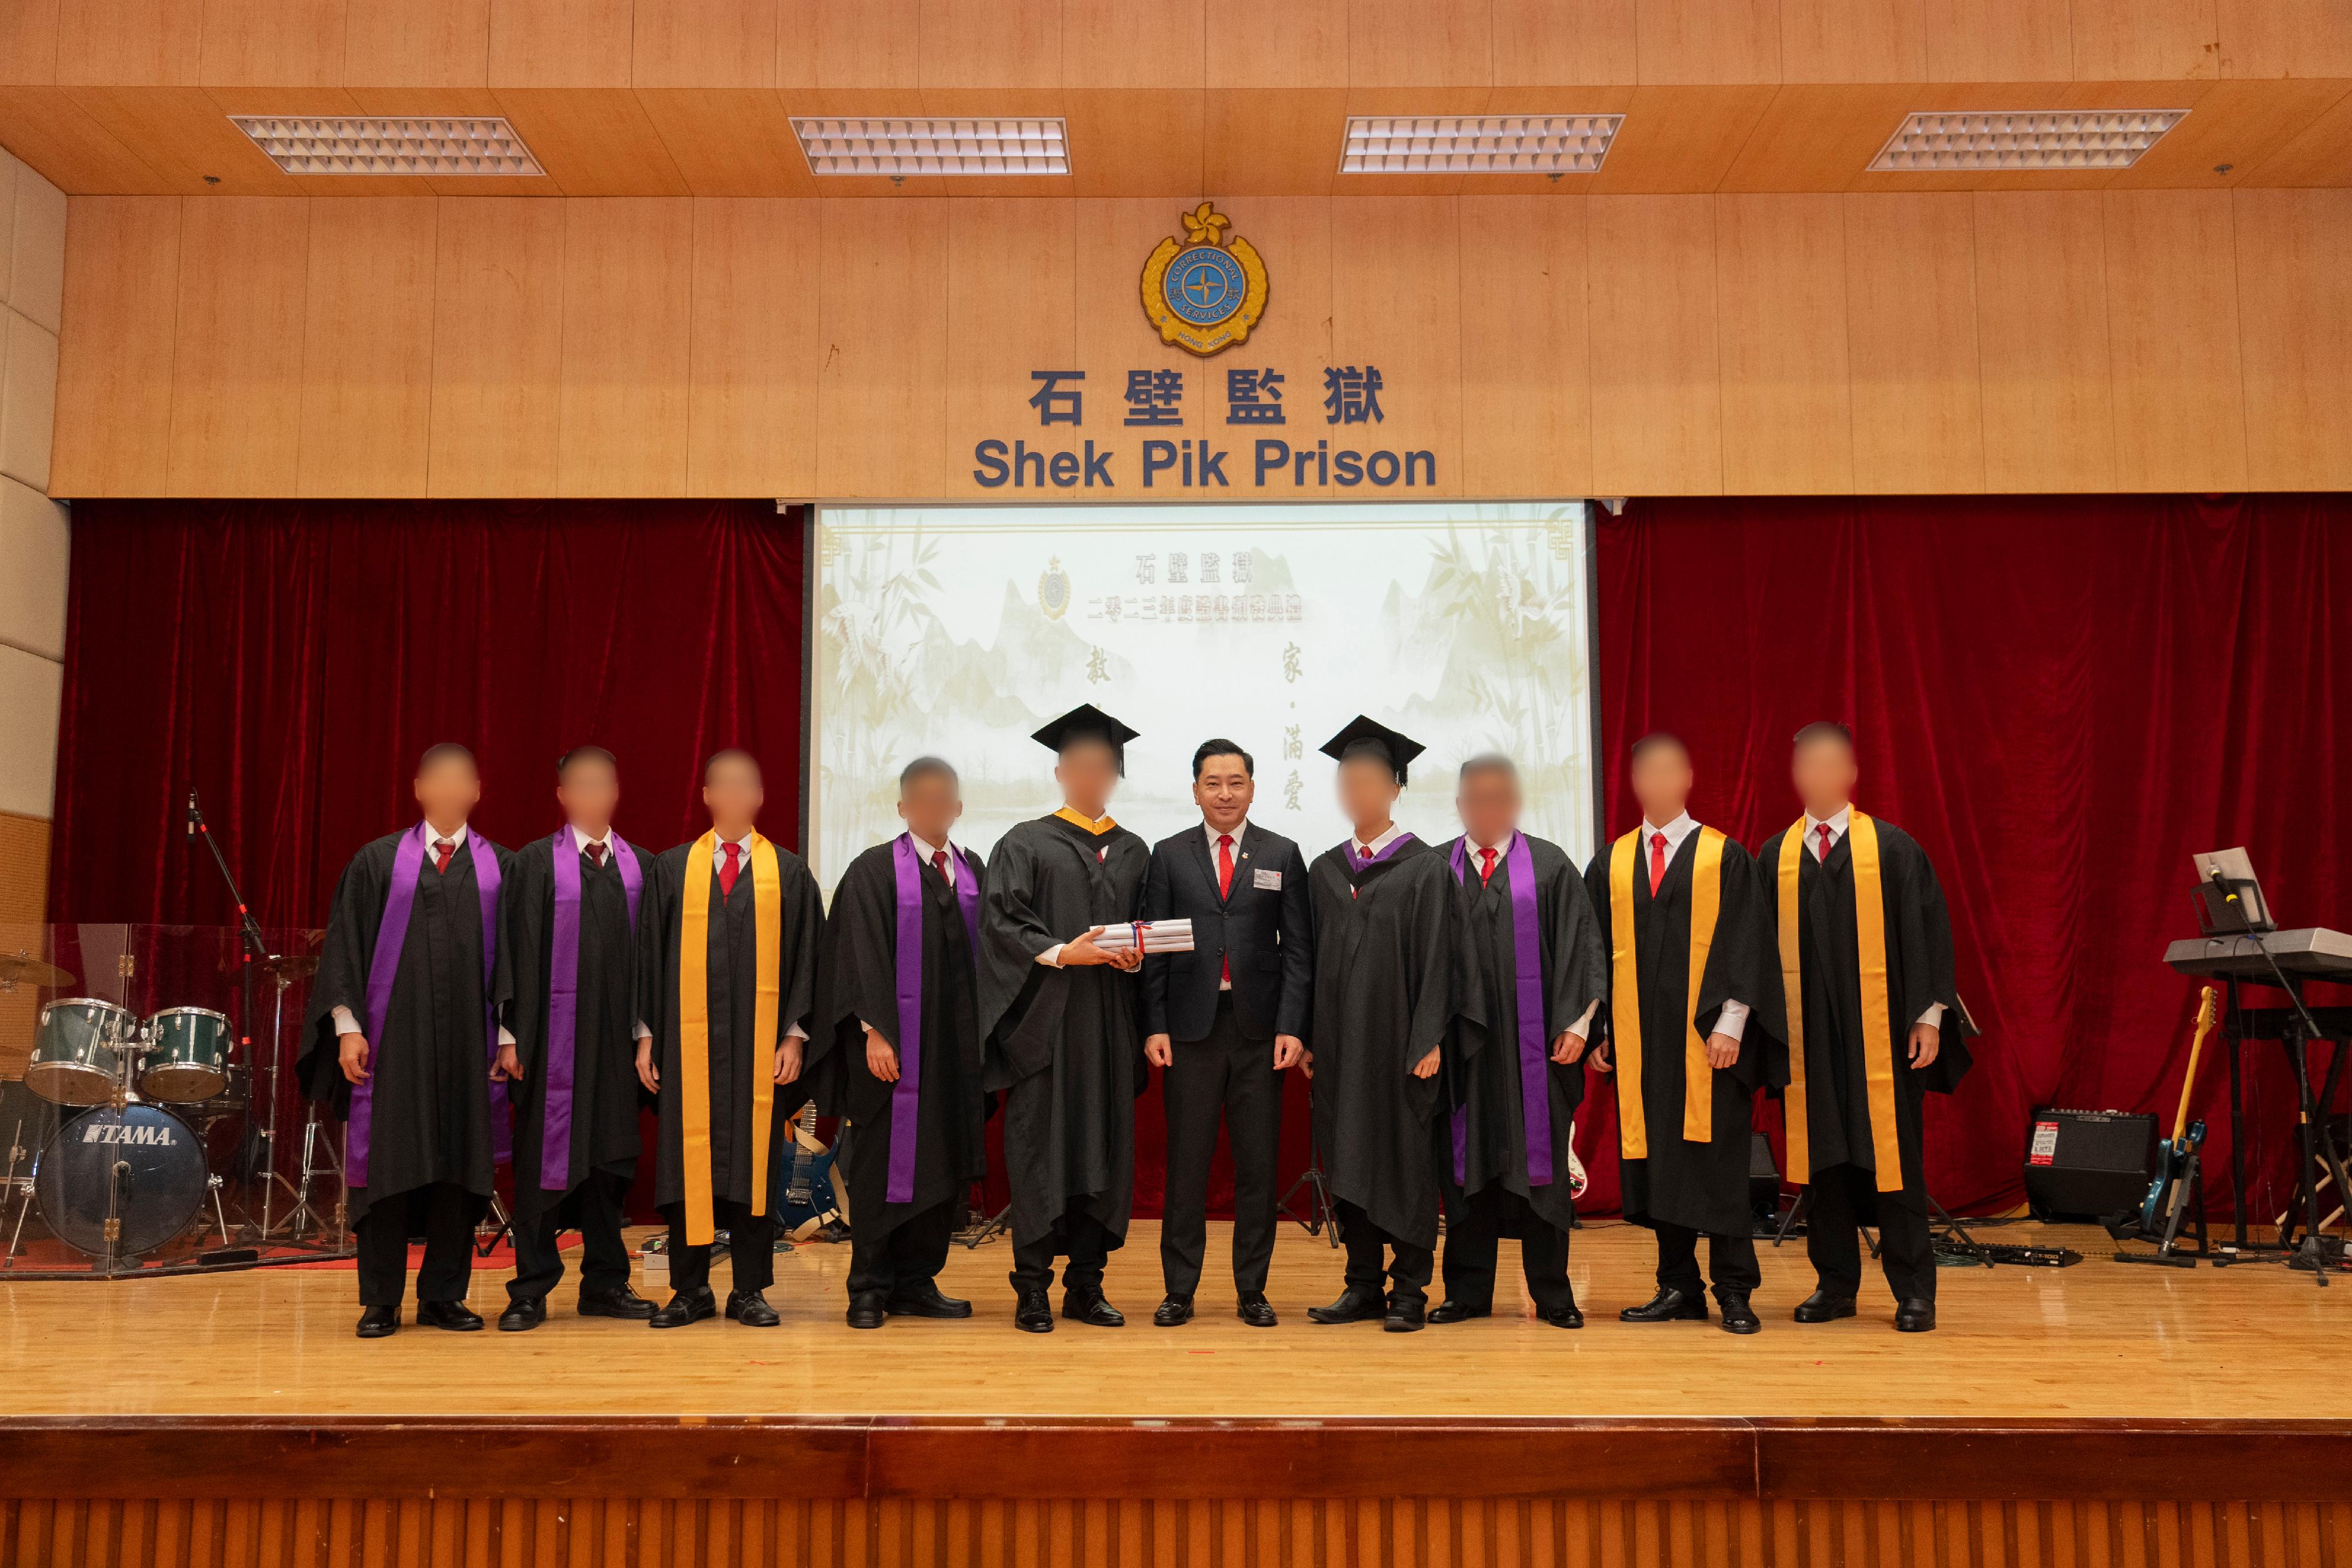 Persons in custody at Shek Pik Prison of the Correctional Services Department were presented with certificates at a ceremony today (November 23) in recognition of their study efforts and academic achievements. Photo shows the Chairman of the Tung Wah Group of Hospitals, Mr Herman Wai (fifth right), presenting certificates to persons in custody.